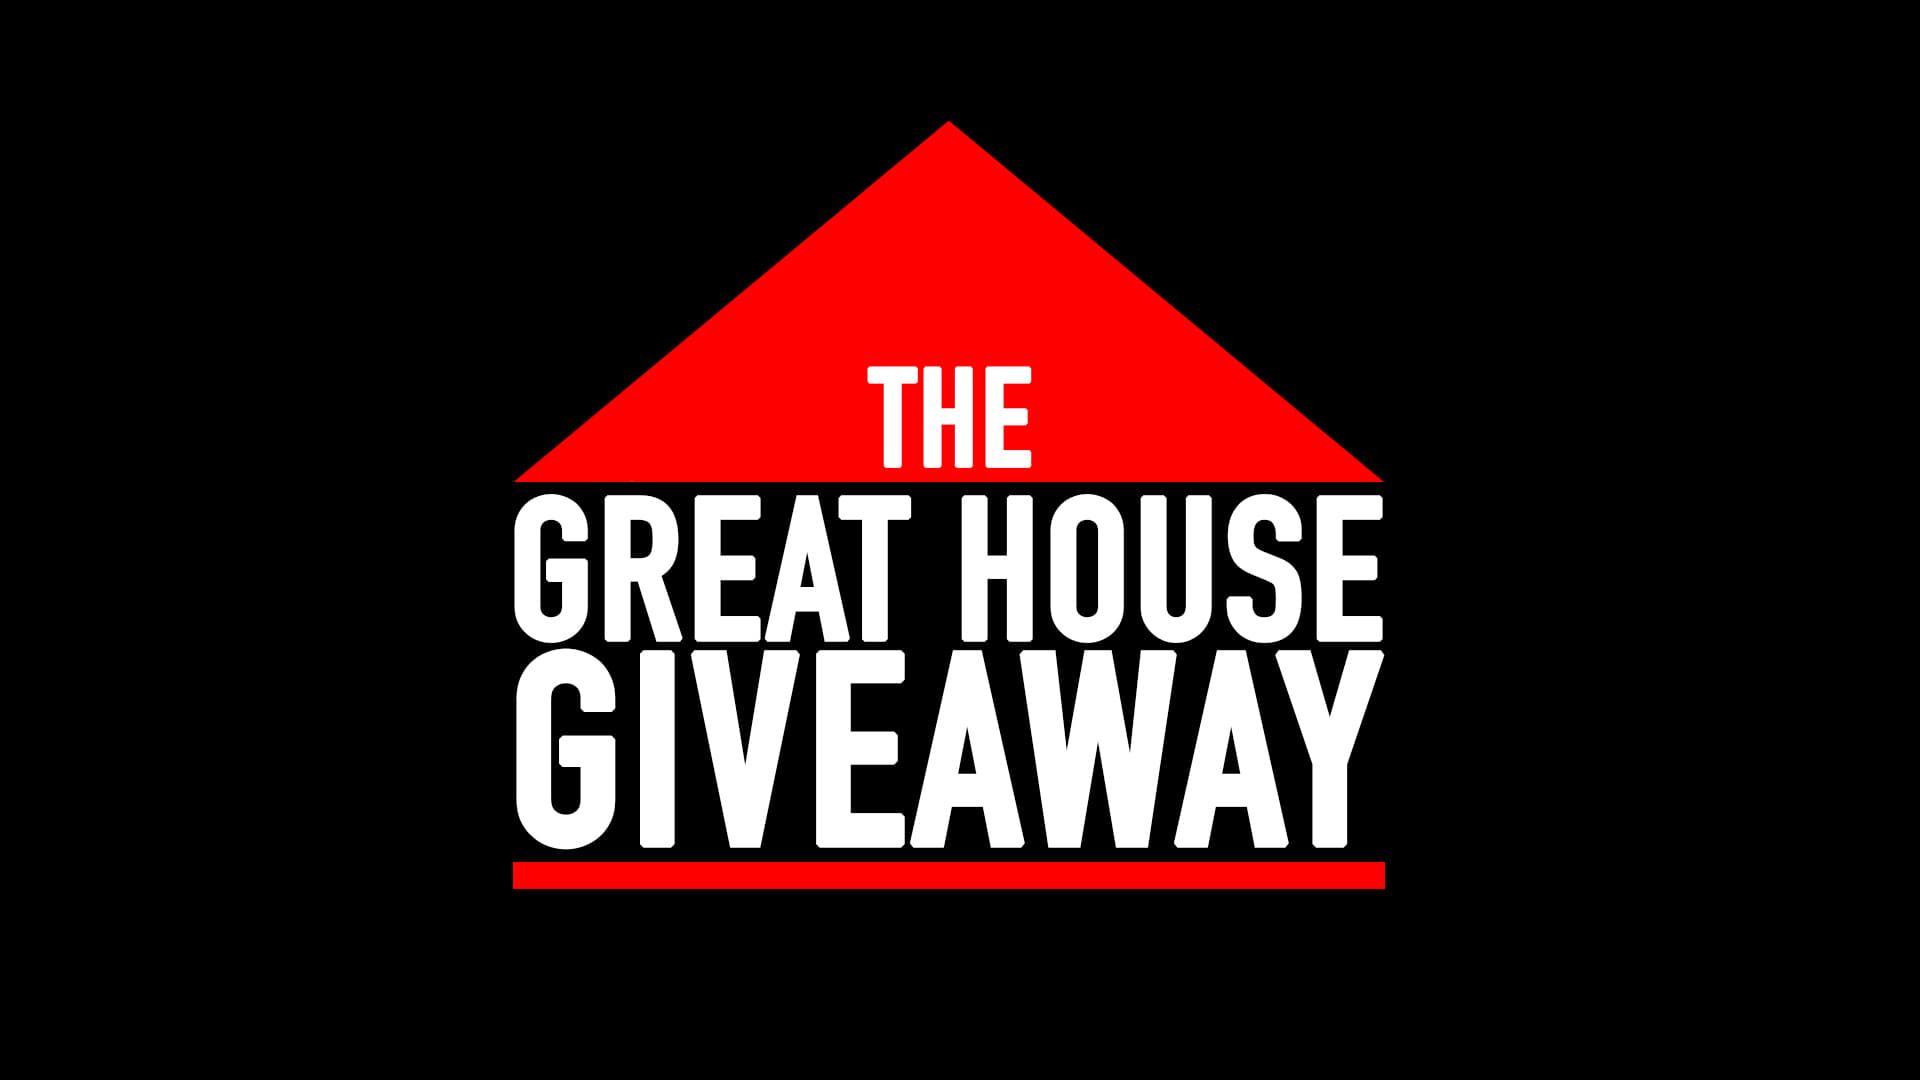 The Great House Giveaway background